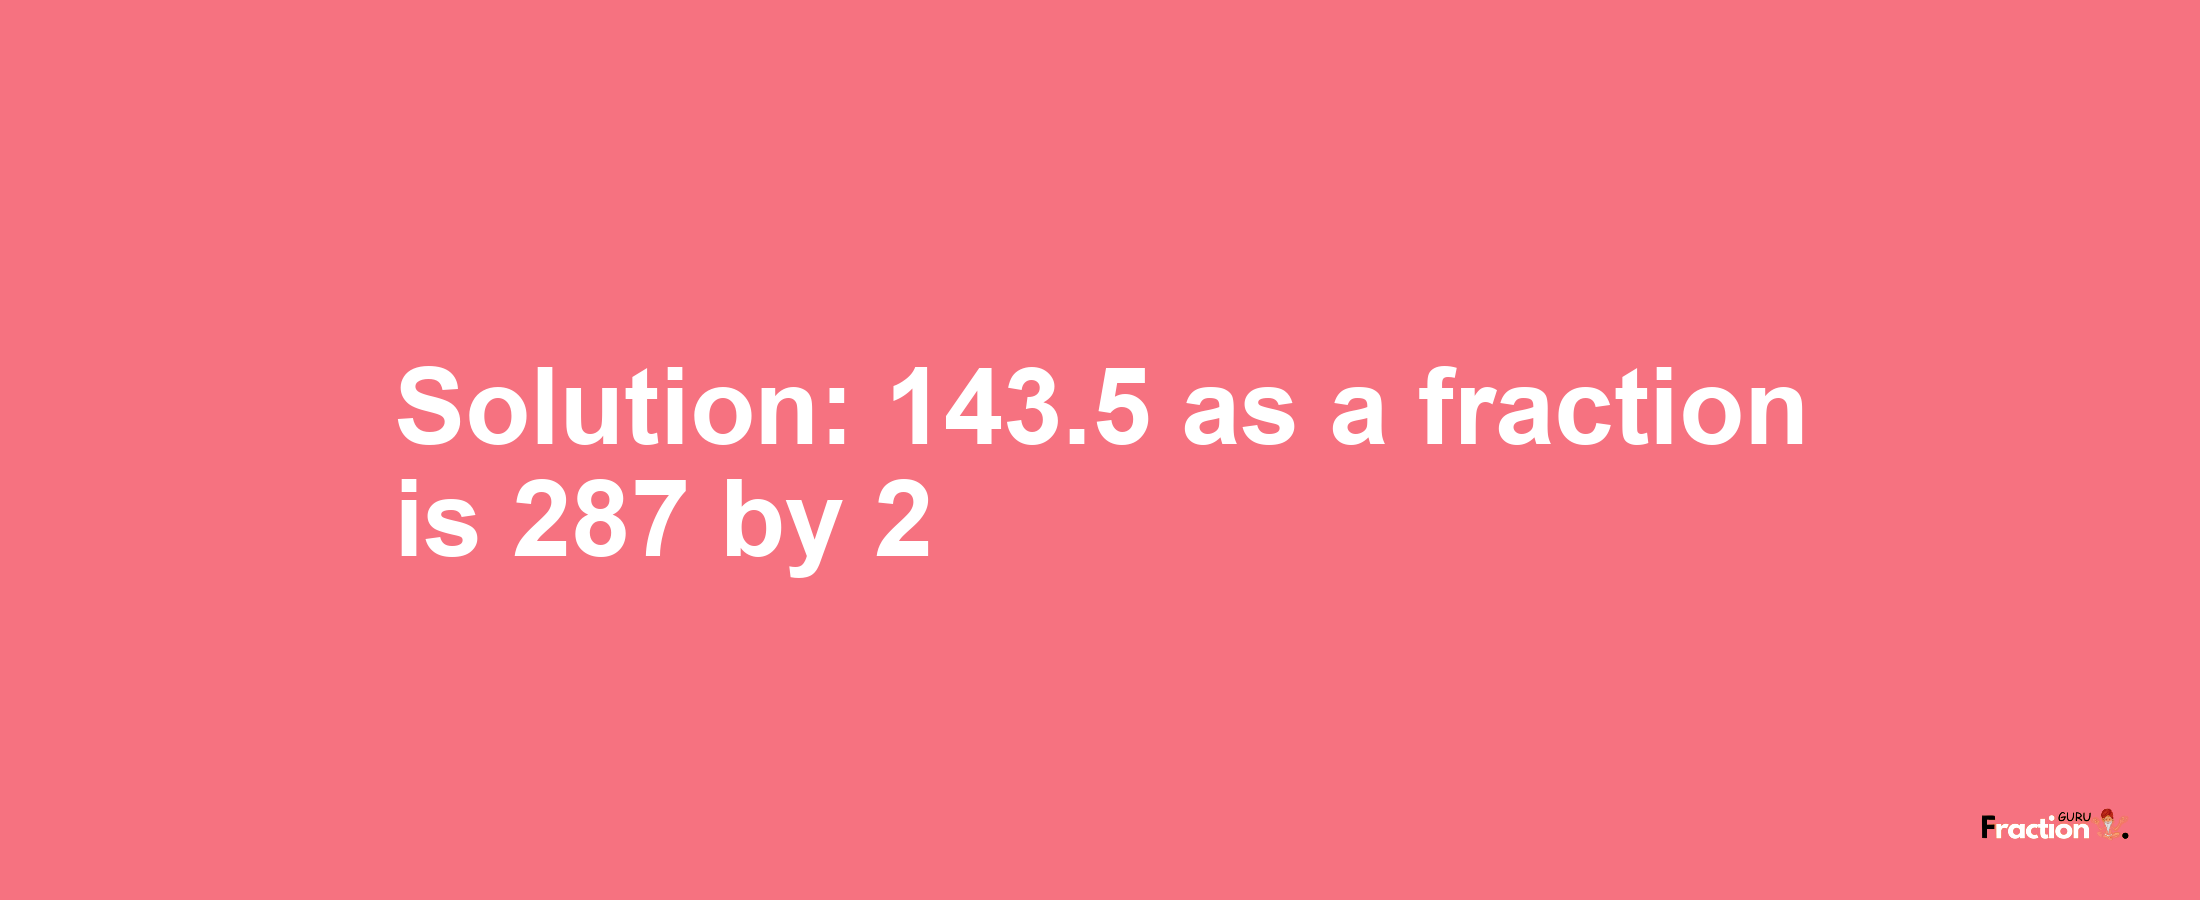 Solution:143.5 as a fraction is 287/2